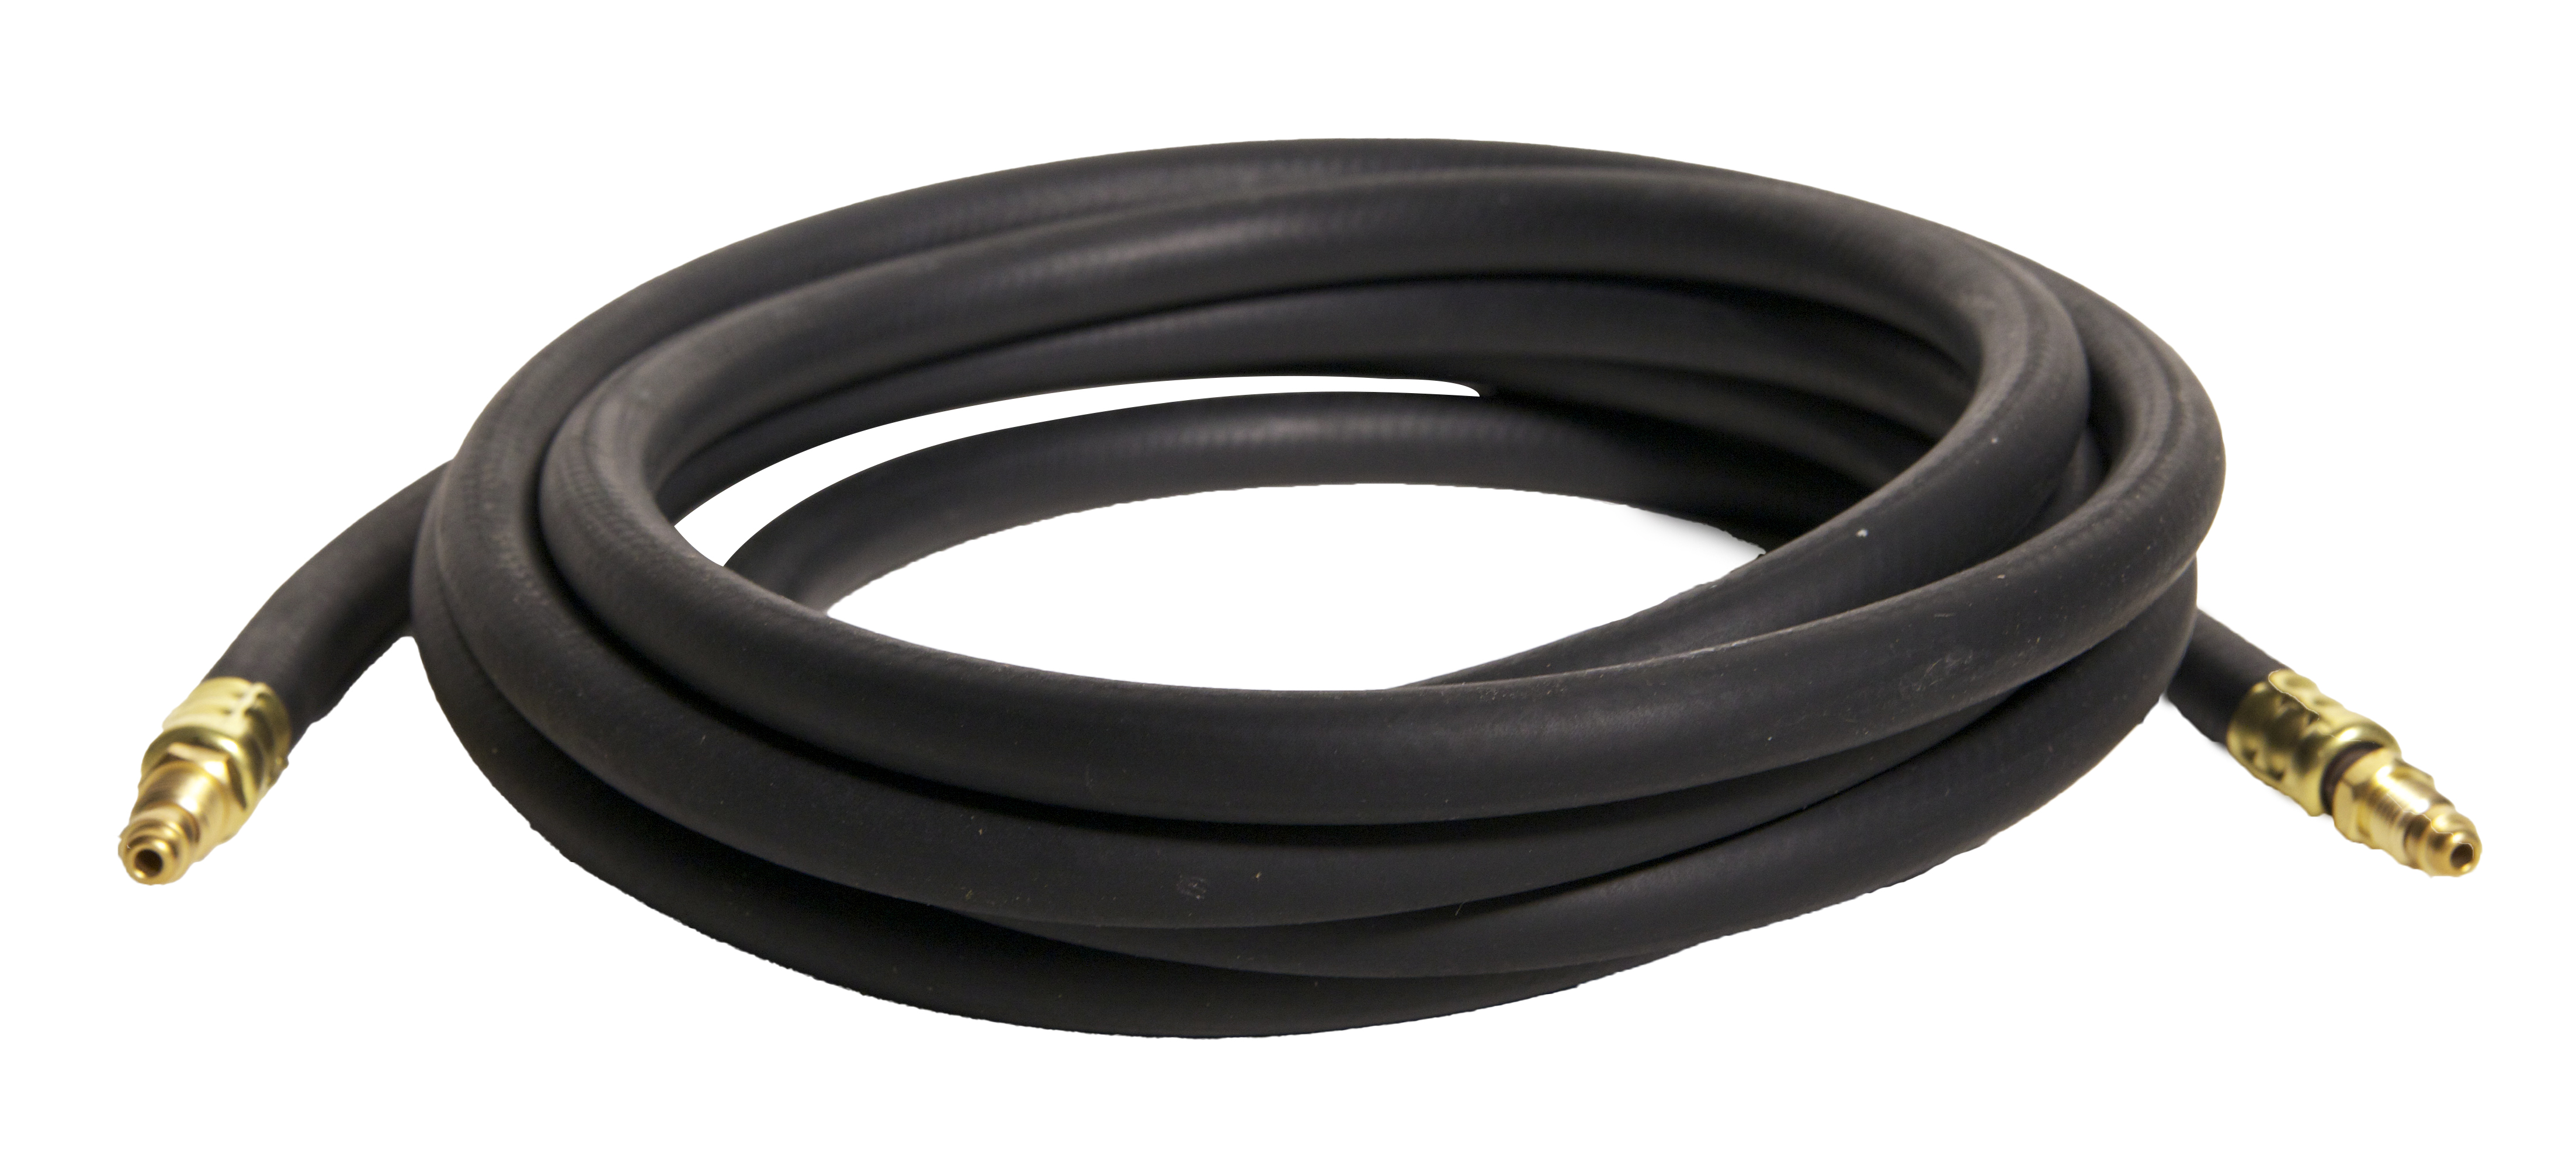 Weldmark by CK Worldwide Rubber Power Cable, 12.5ft, TW9 & 17